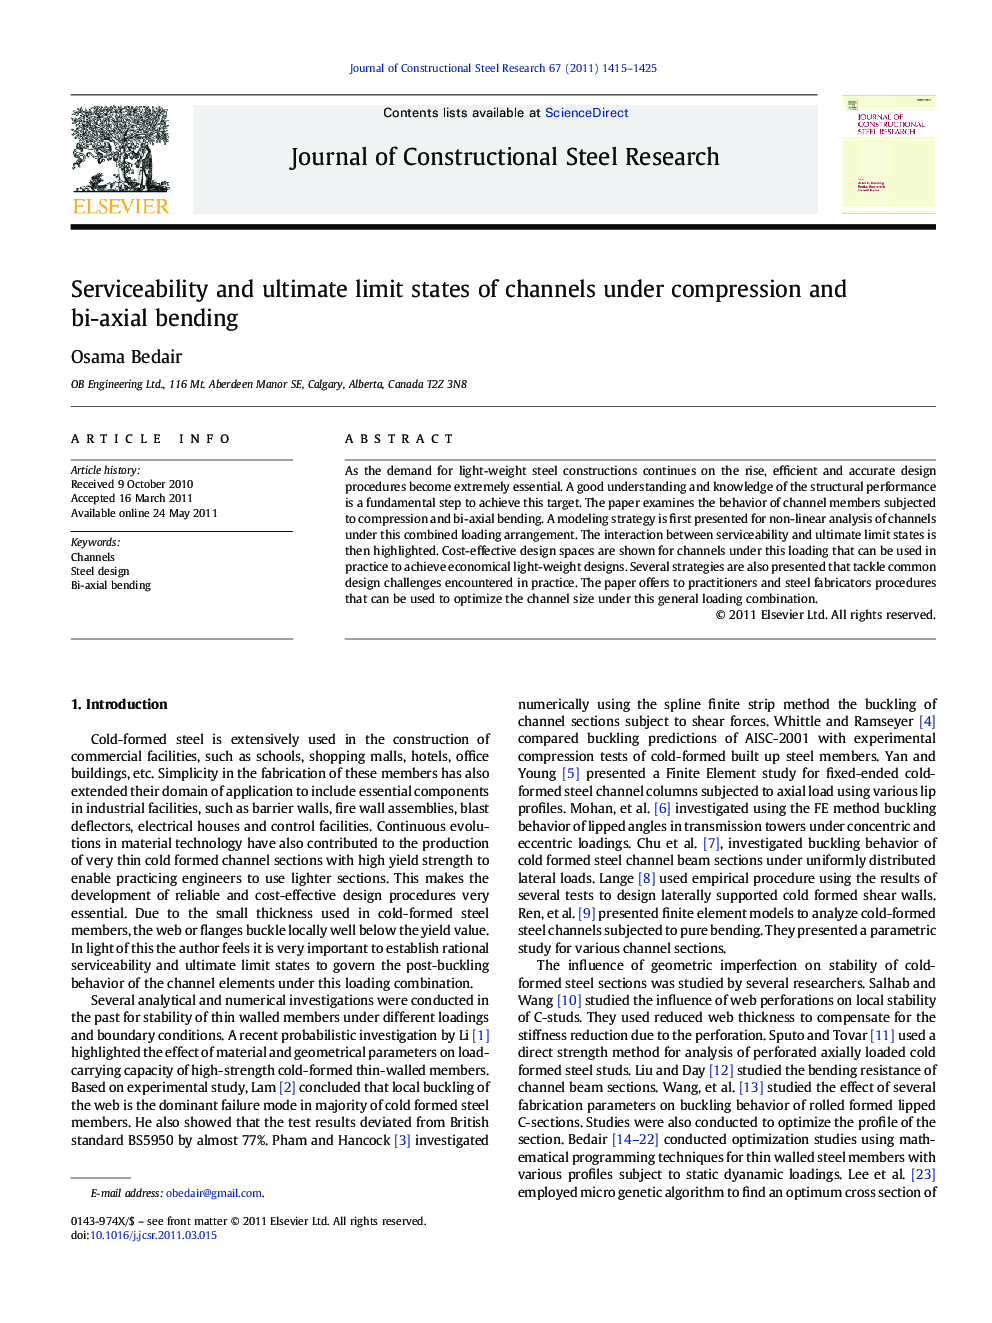 Serviceability and ultimate limit states of channels under compression and bi-axial bending